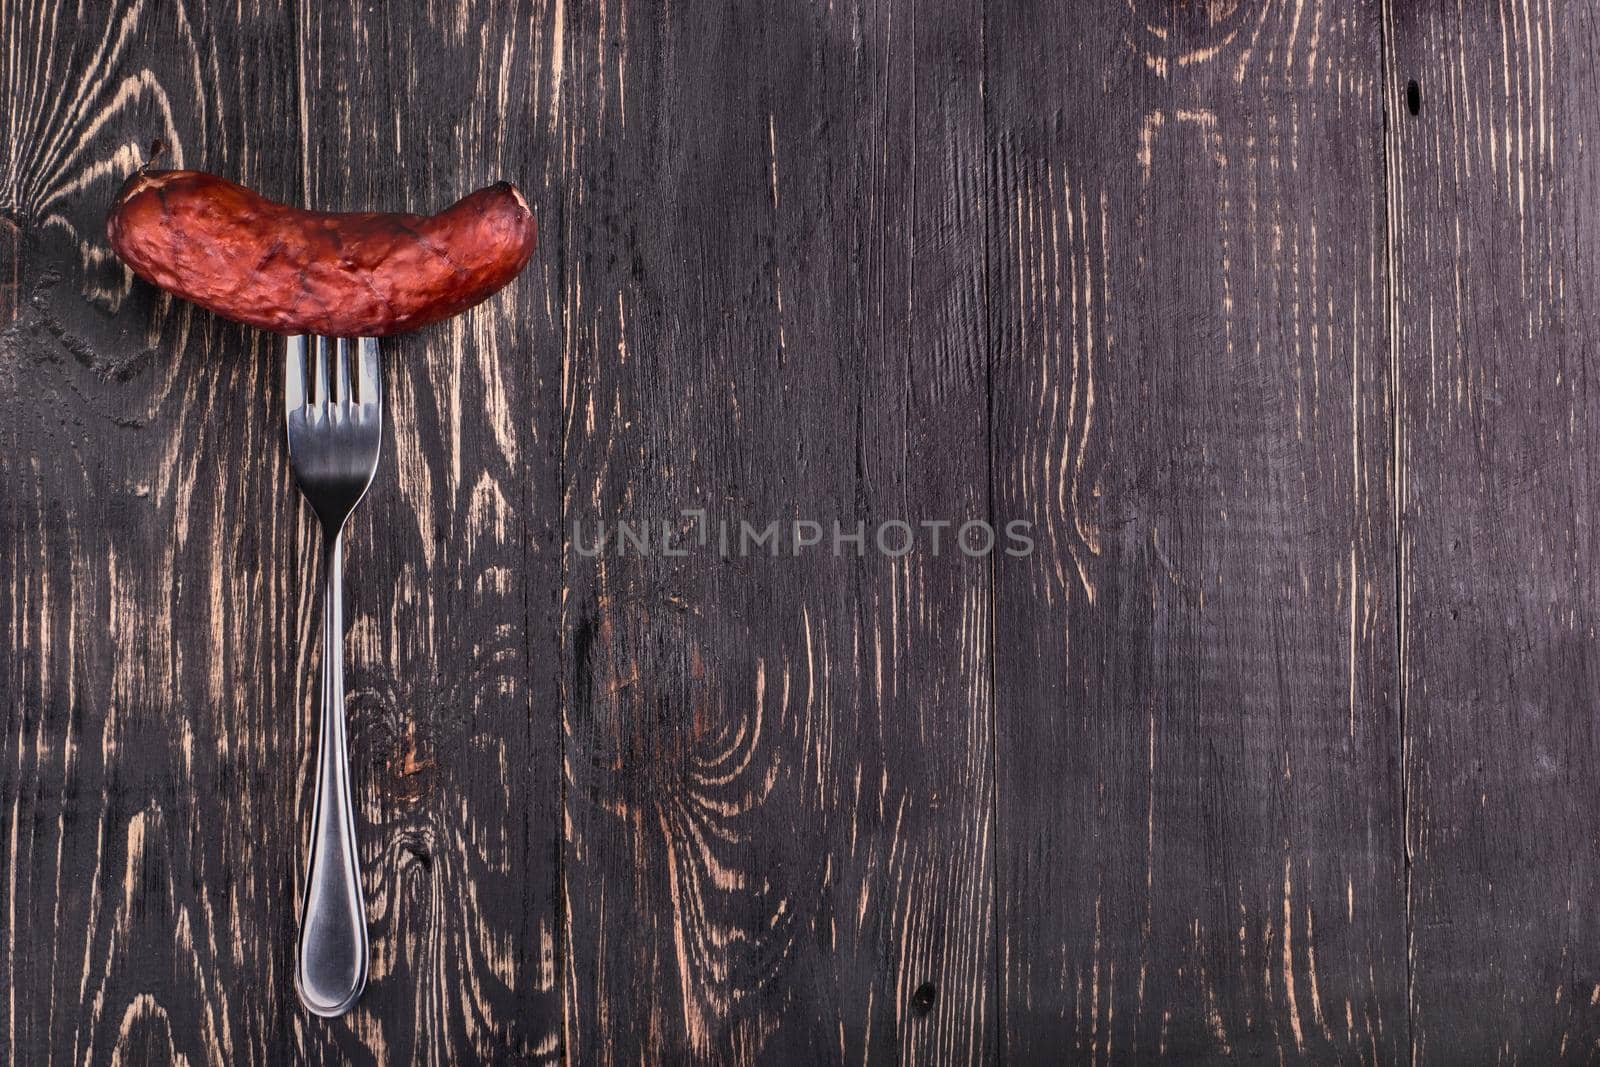 Meat sausage for grilling on a fork on a dark wooden background